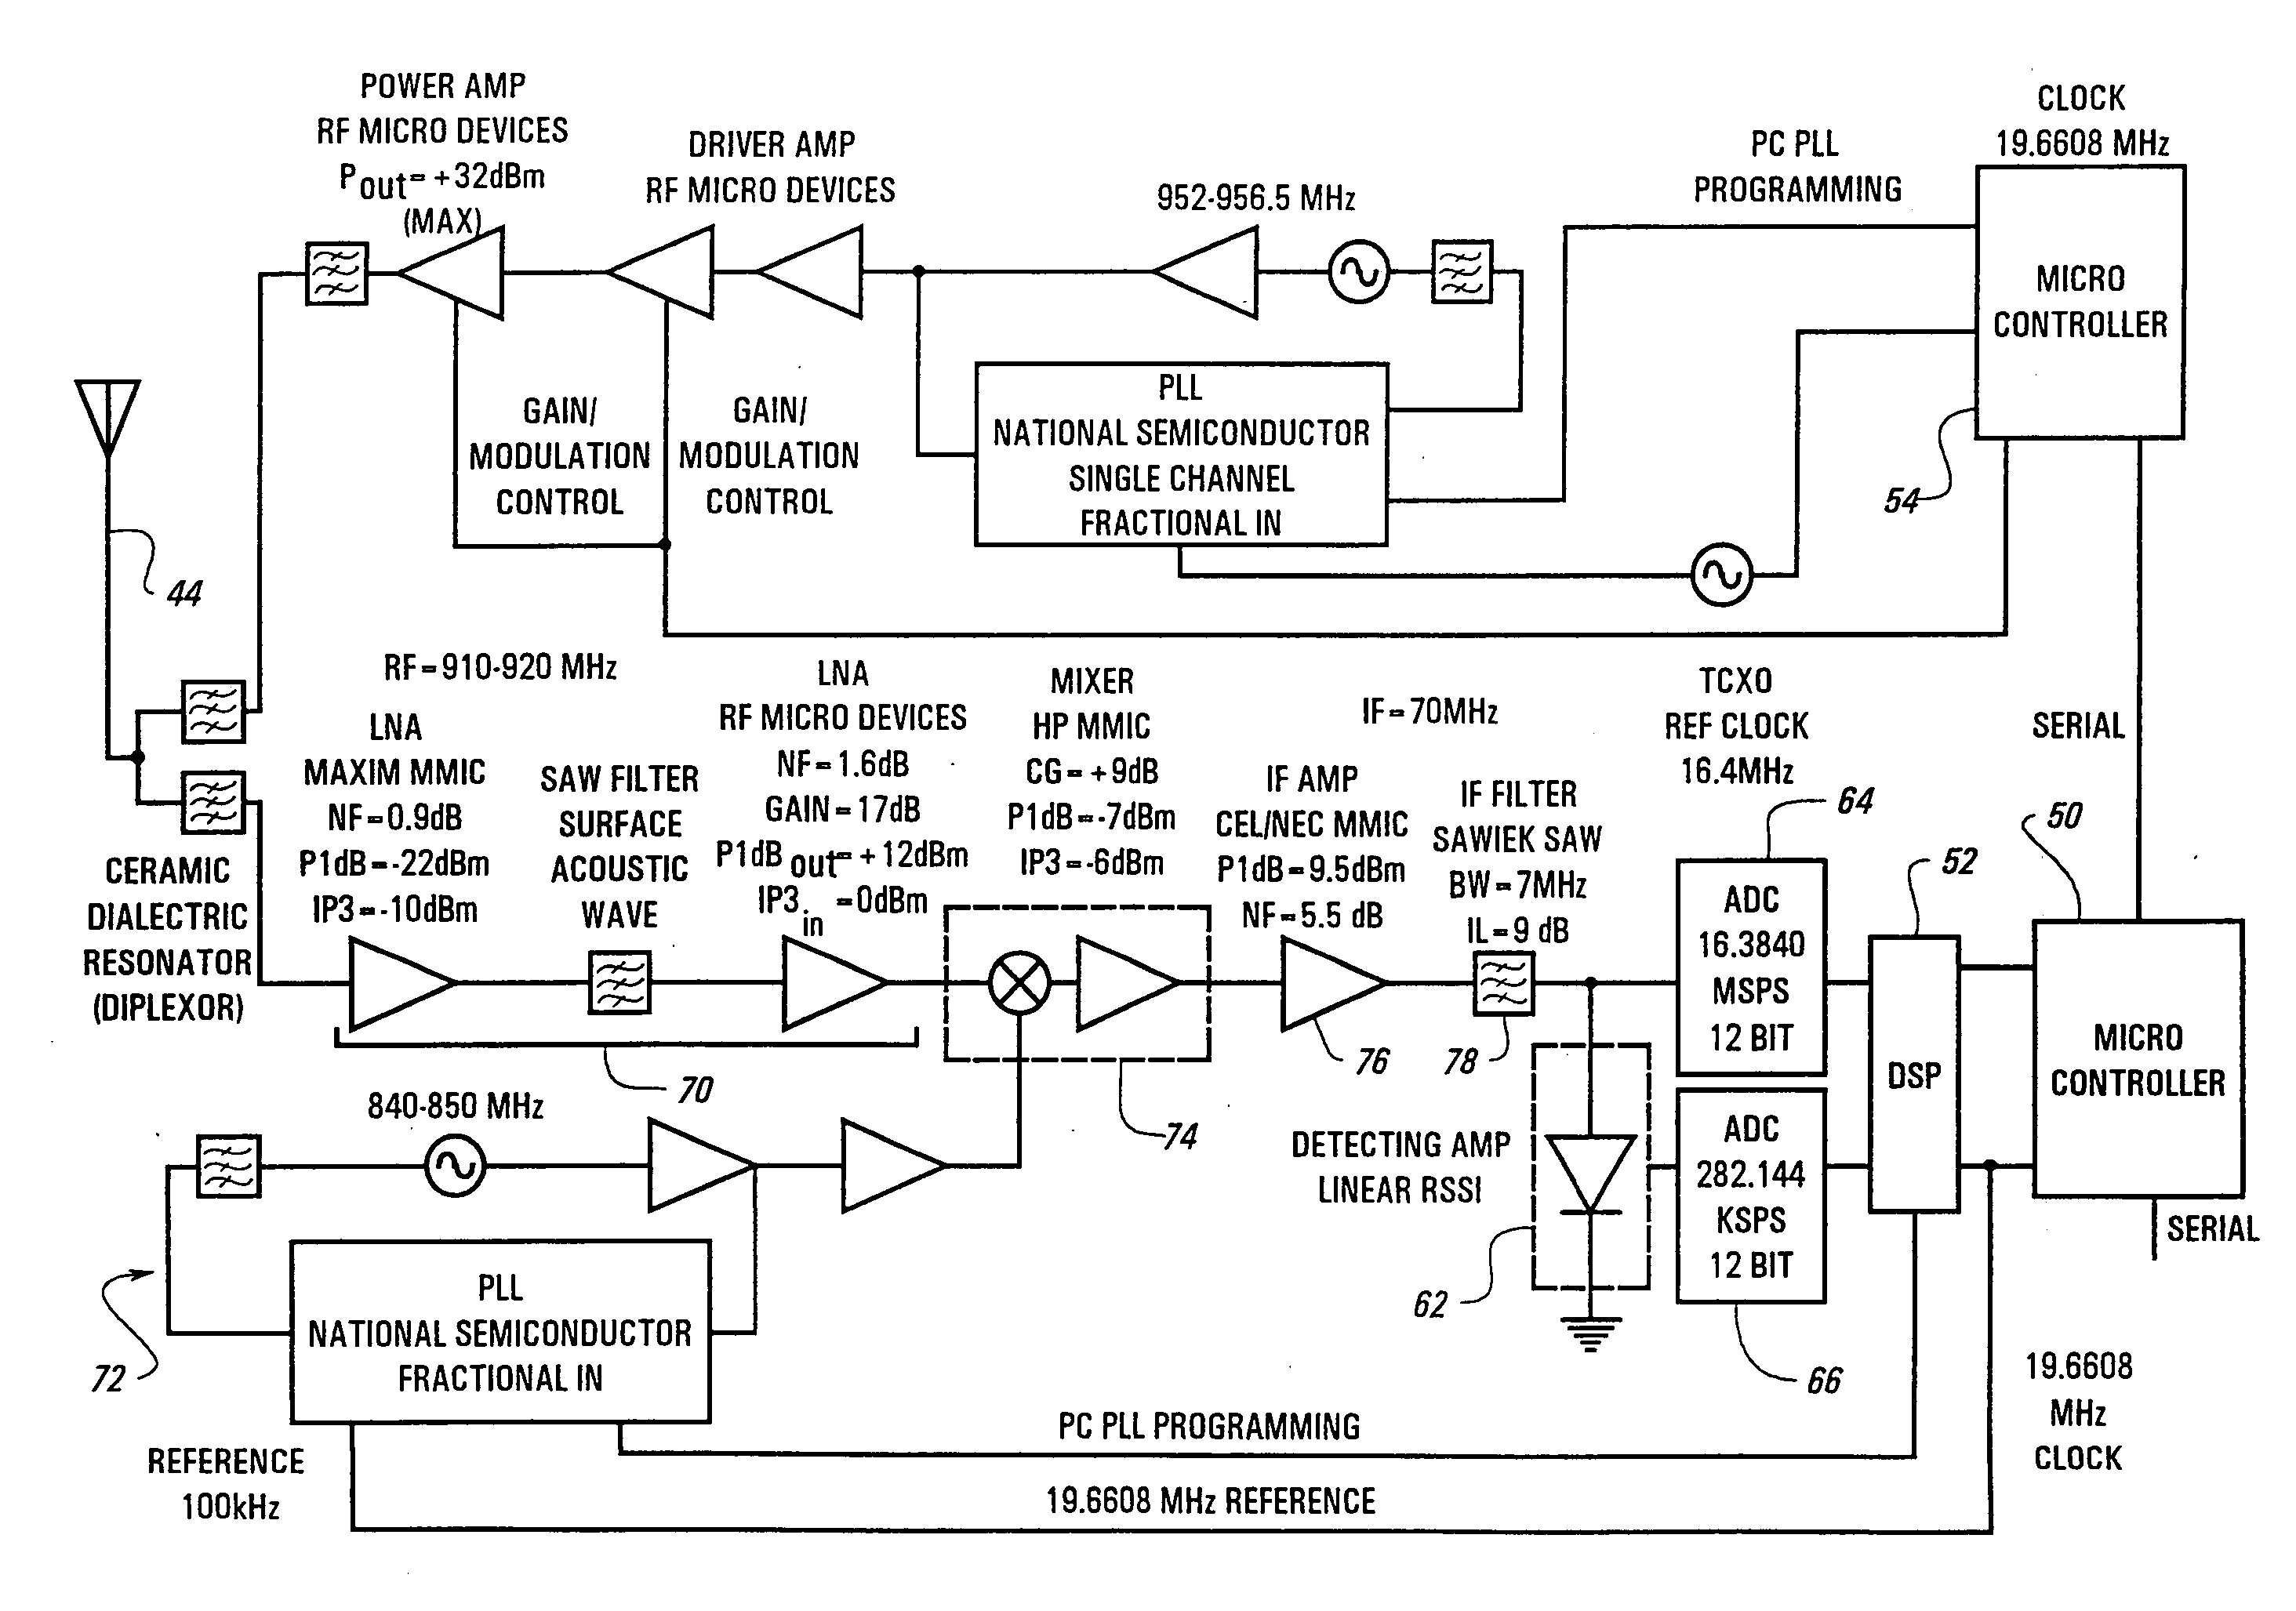 Frequency hopping spread spectrum system with high sensitivity tracking and synchronization for frequency unstable signals